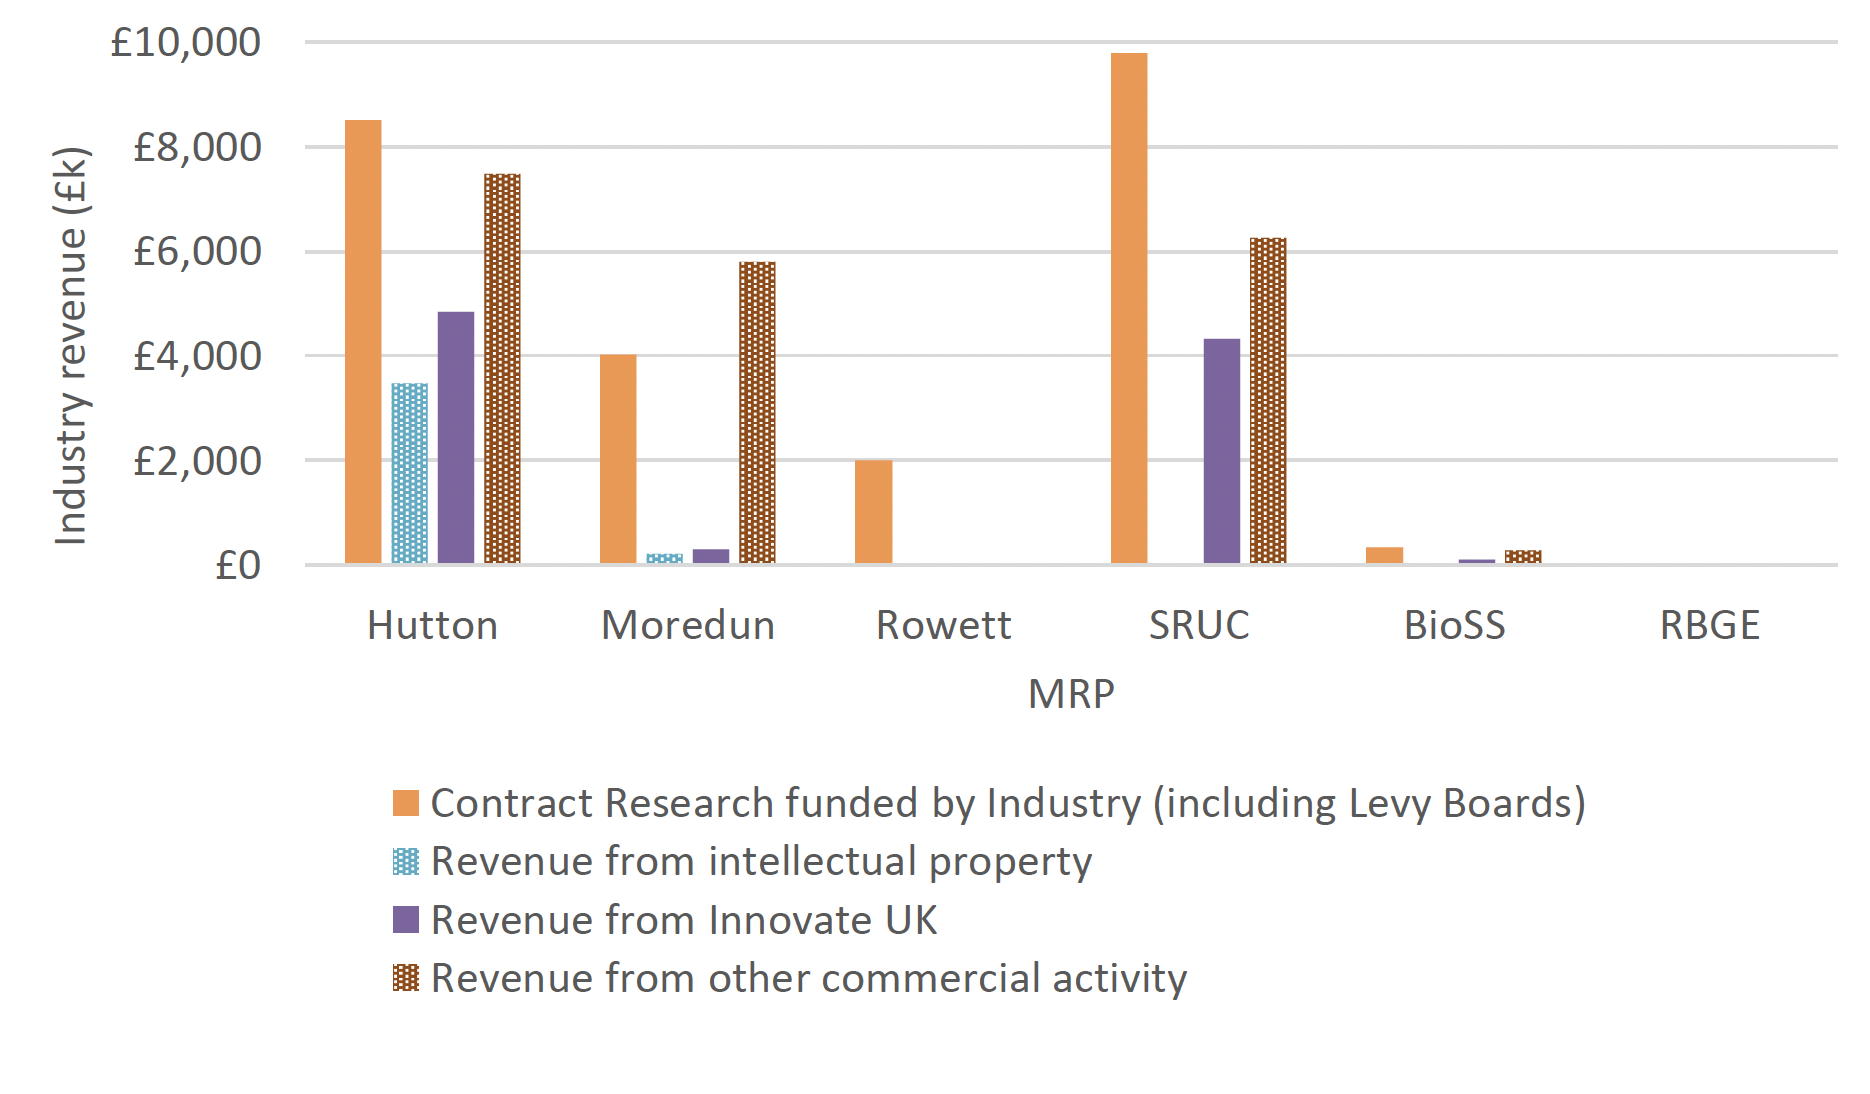 This figure shows data between 2016 and 2021 for industry revenue generated by each of the Main Research Providers. Contract revenue is the greatest source of income at Hutton (£8.5 million), Rowett (£2.5 million), SRUC (£9.8 million) and BioSS (£330,000), whilst Moredun's main source of income was revenue from other commercial activity (£5.8 million).